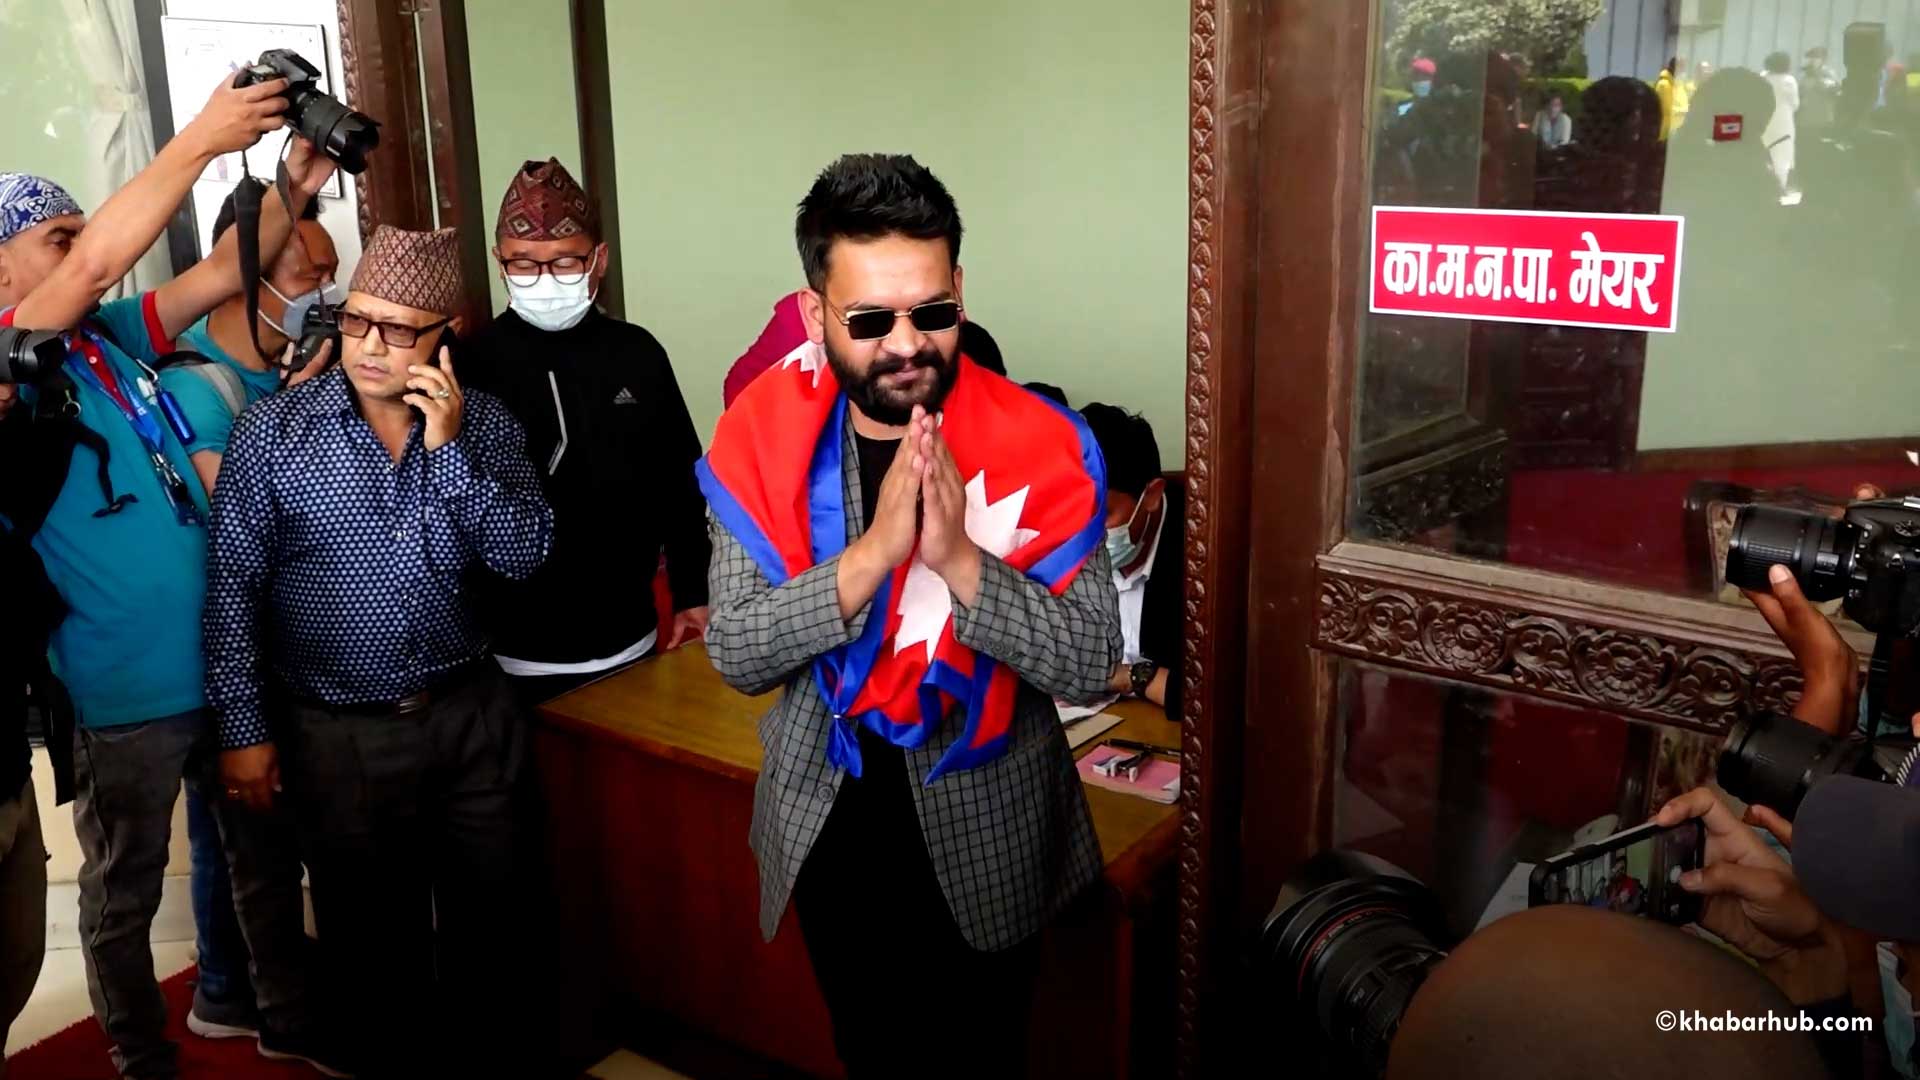 Balen leading as votes come in for Kathmandu mayoral race